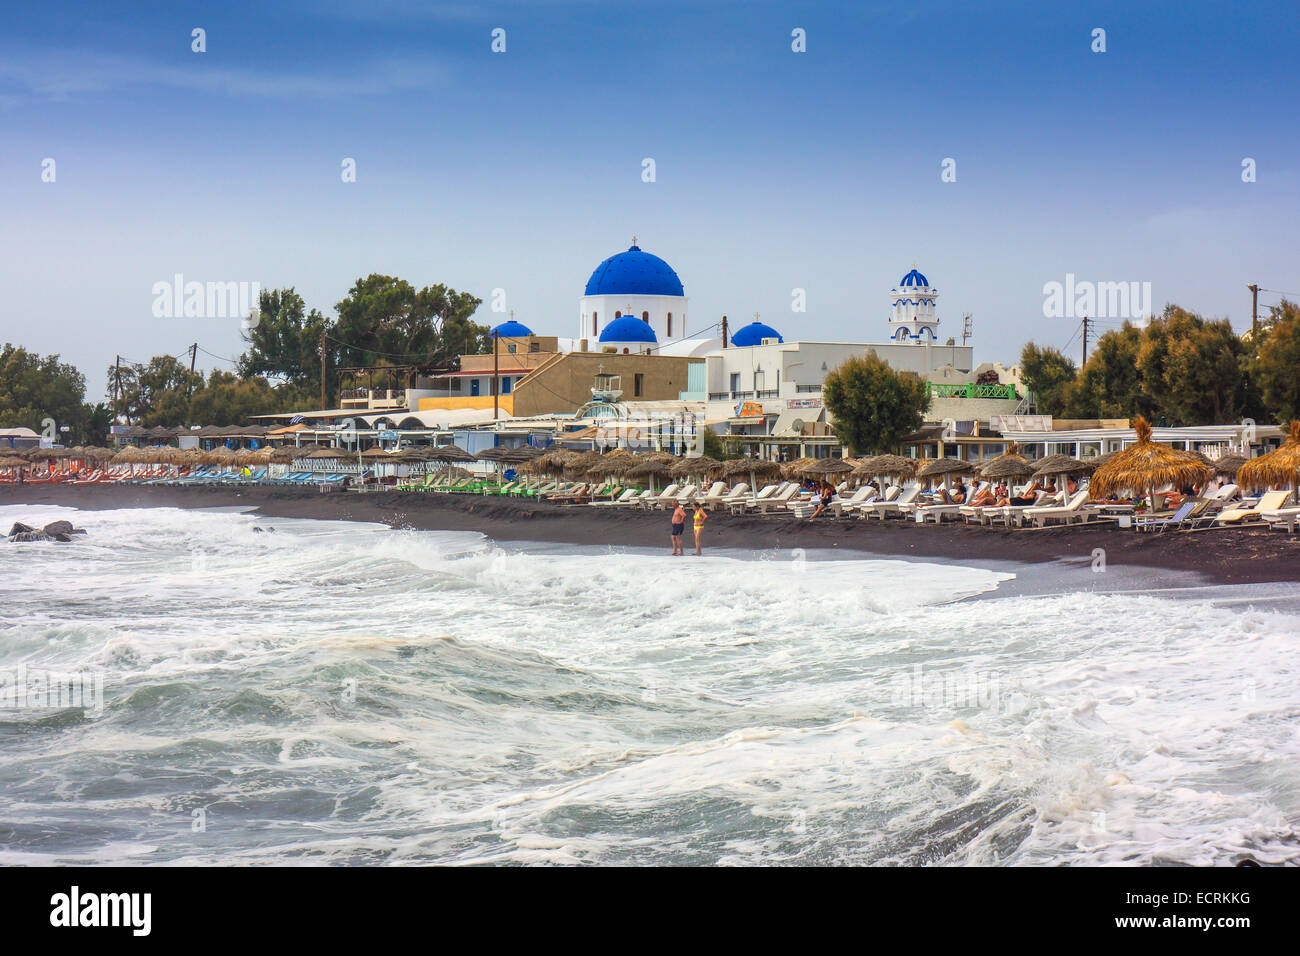 Stormy sea, beach with loungers and blue dome of Greek Orthodox church Stock Photo